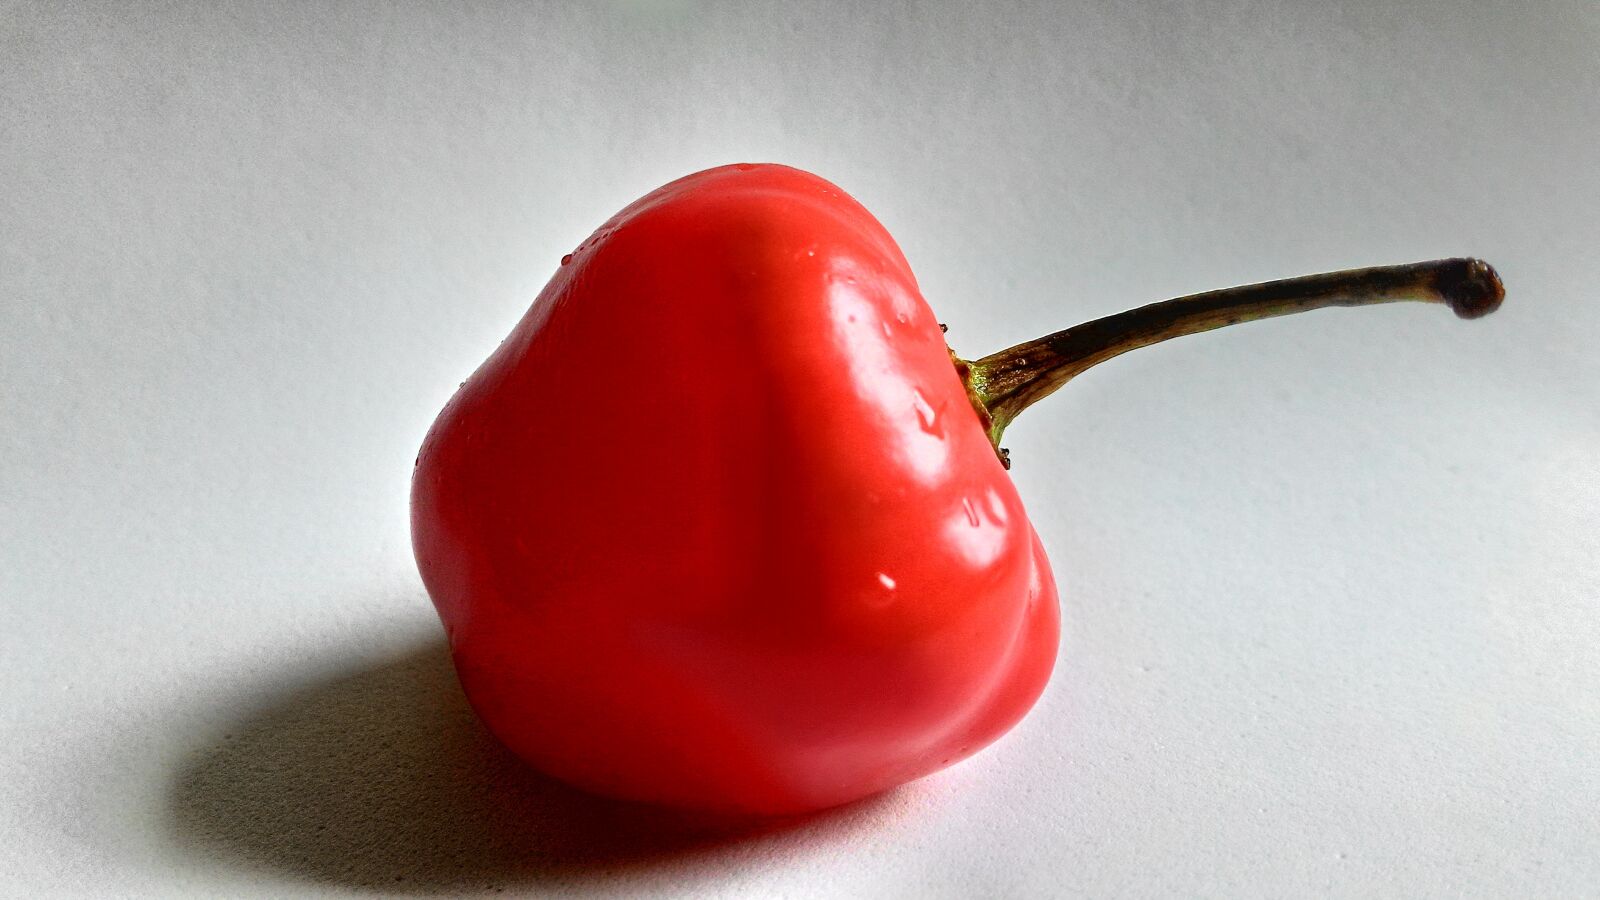 ASUS Z002 sample photo. Pepper, red, food photography